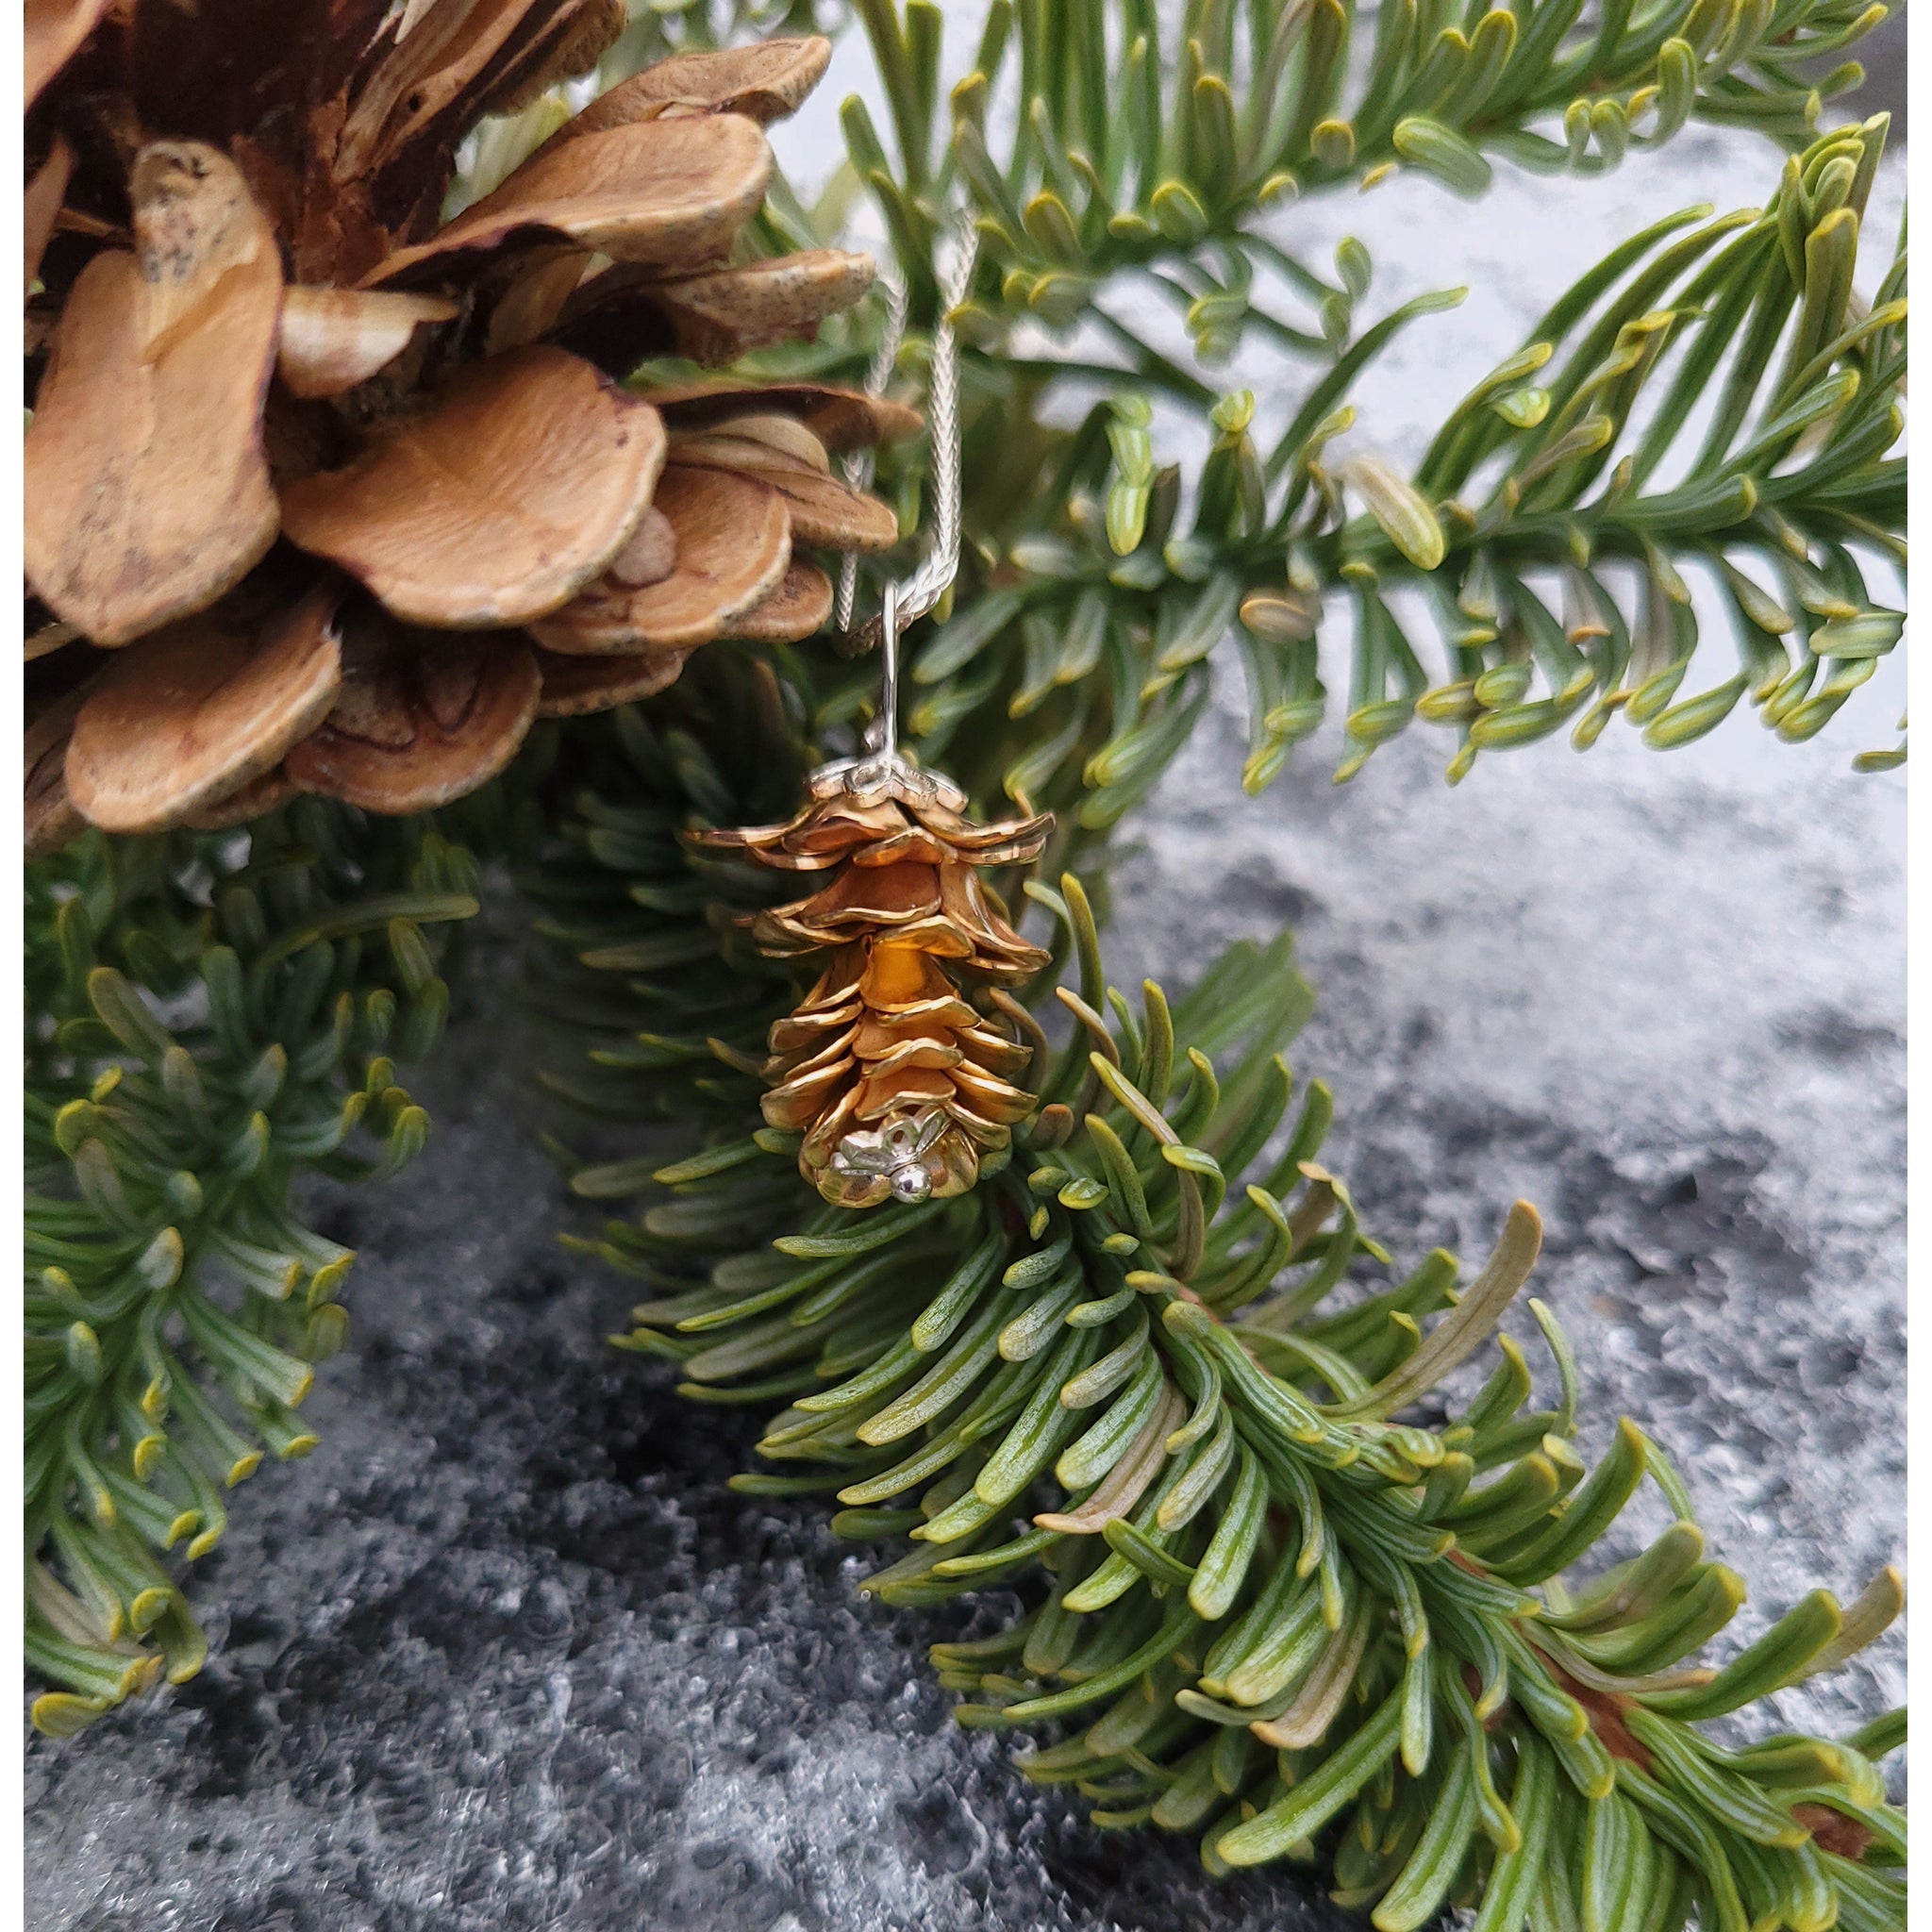 Gold Pine Cone Necklace